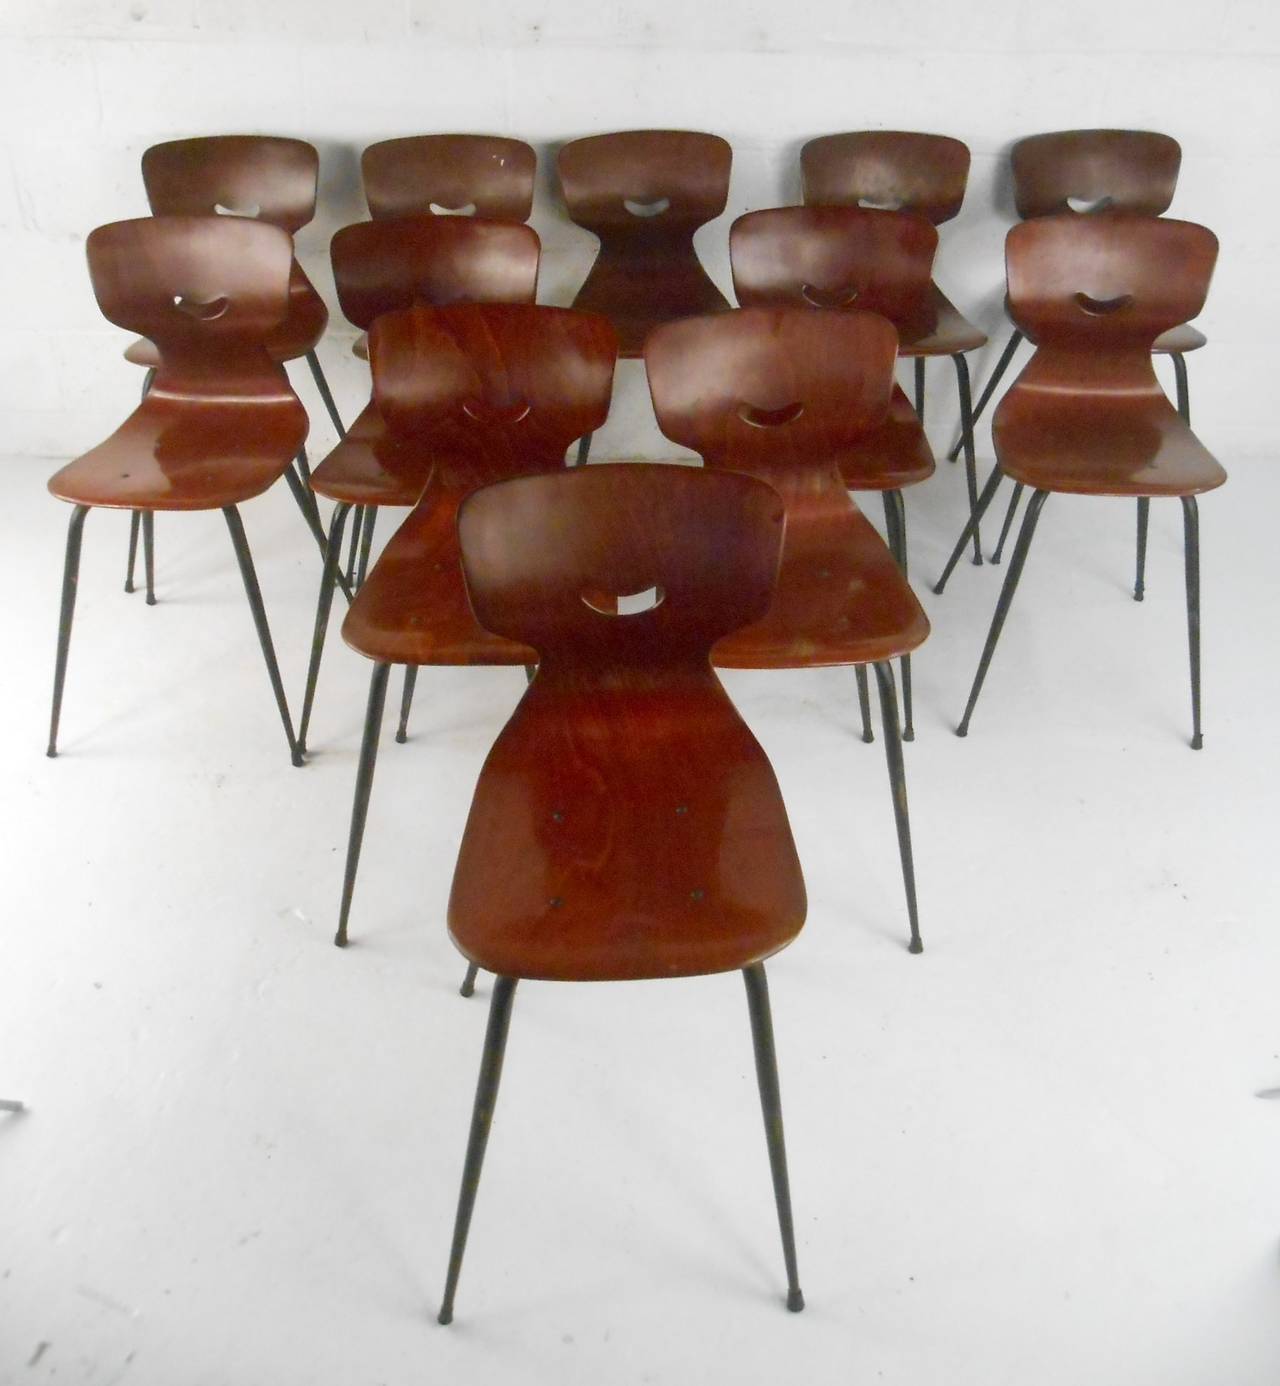 Beautiful industrial strength molded chairs designed by Adam Stegner. Made from strong Pagwood shaped seats (Pagwood is high density laminated compressed wood, with orthopaedic pelvic and back support without adjustment), set on strong iron tapered